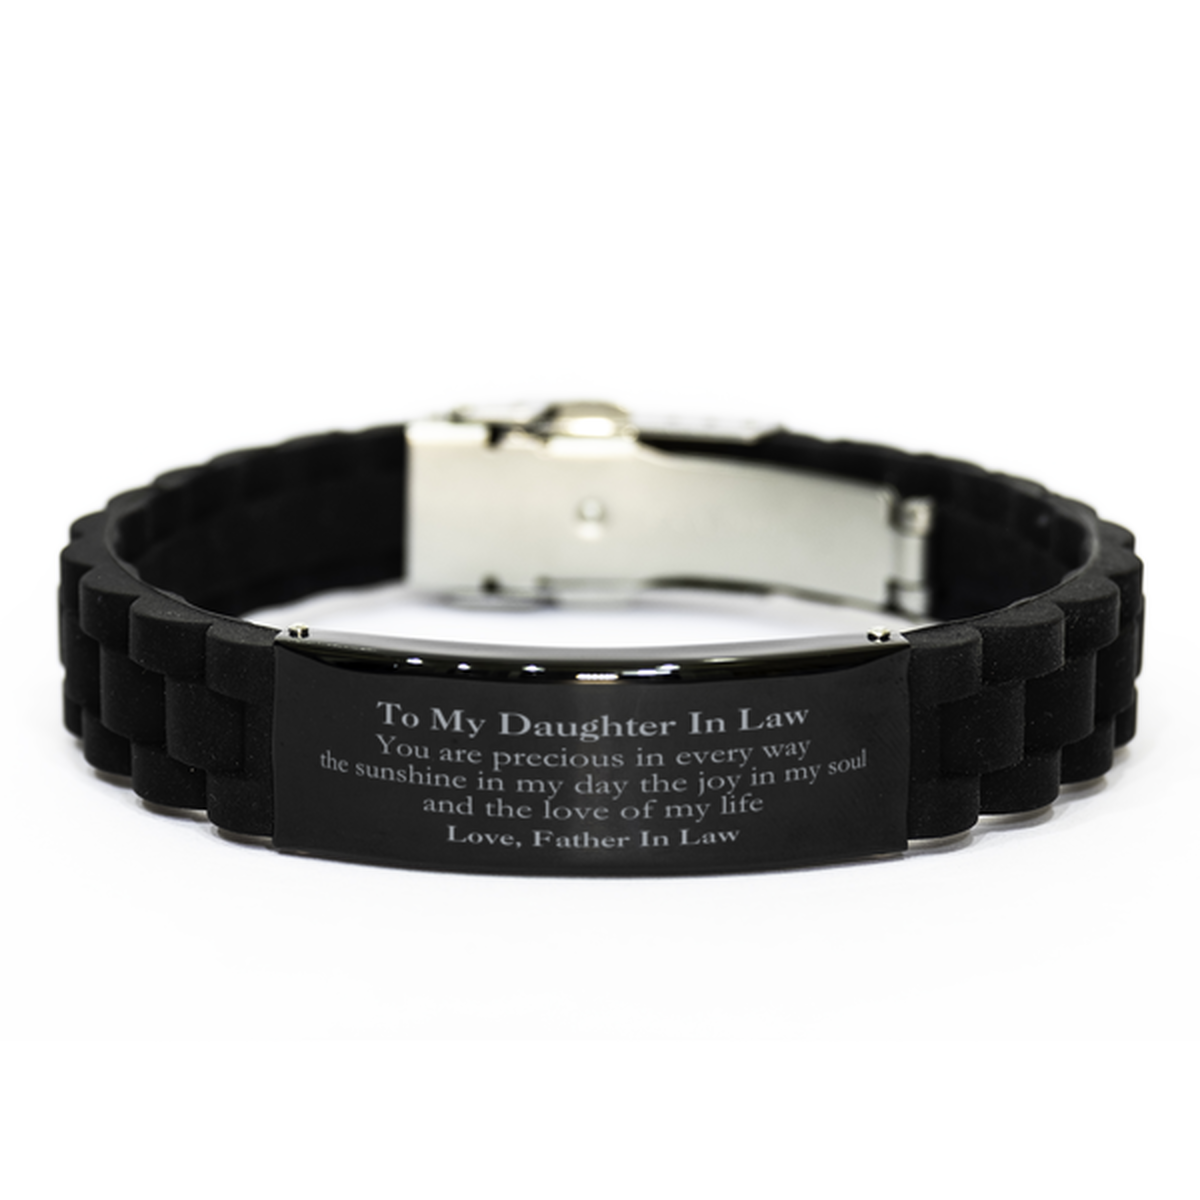 Graduation Gifts for Daughter In Law Black Glidelock Clasp Bracelet Present from Father In Law, Christmas Daughter In Law Birthday Gifts Daughter In Law You are precious in every way the sunshine in my day. Love, Father In Law